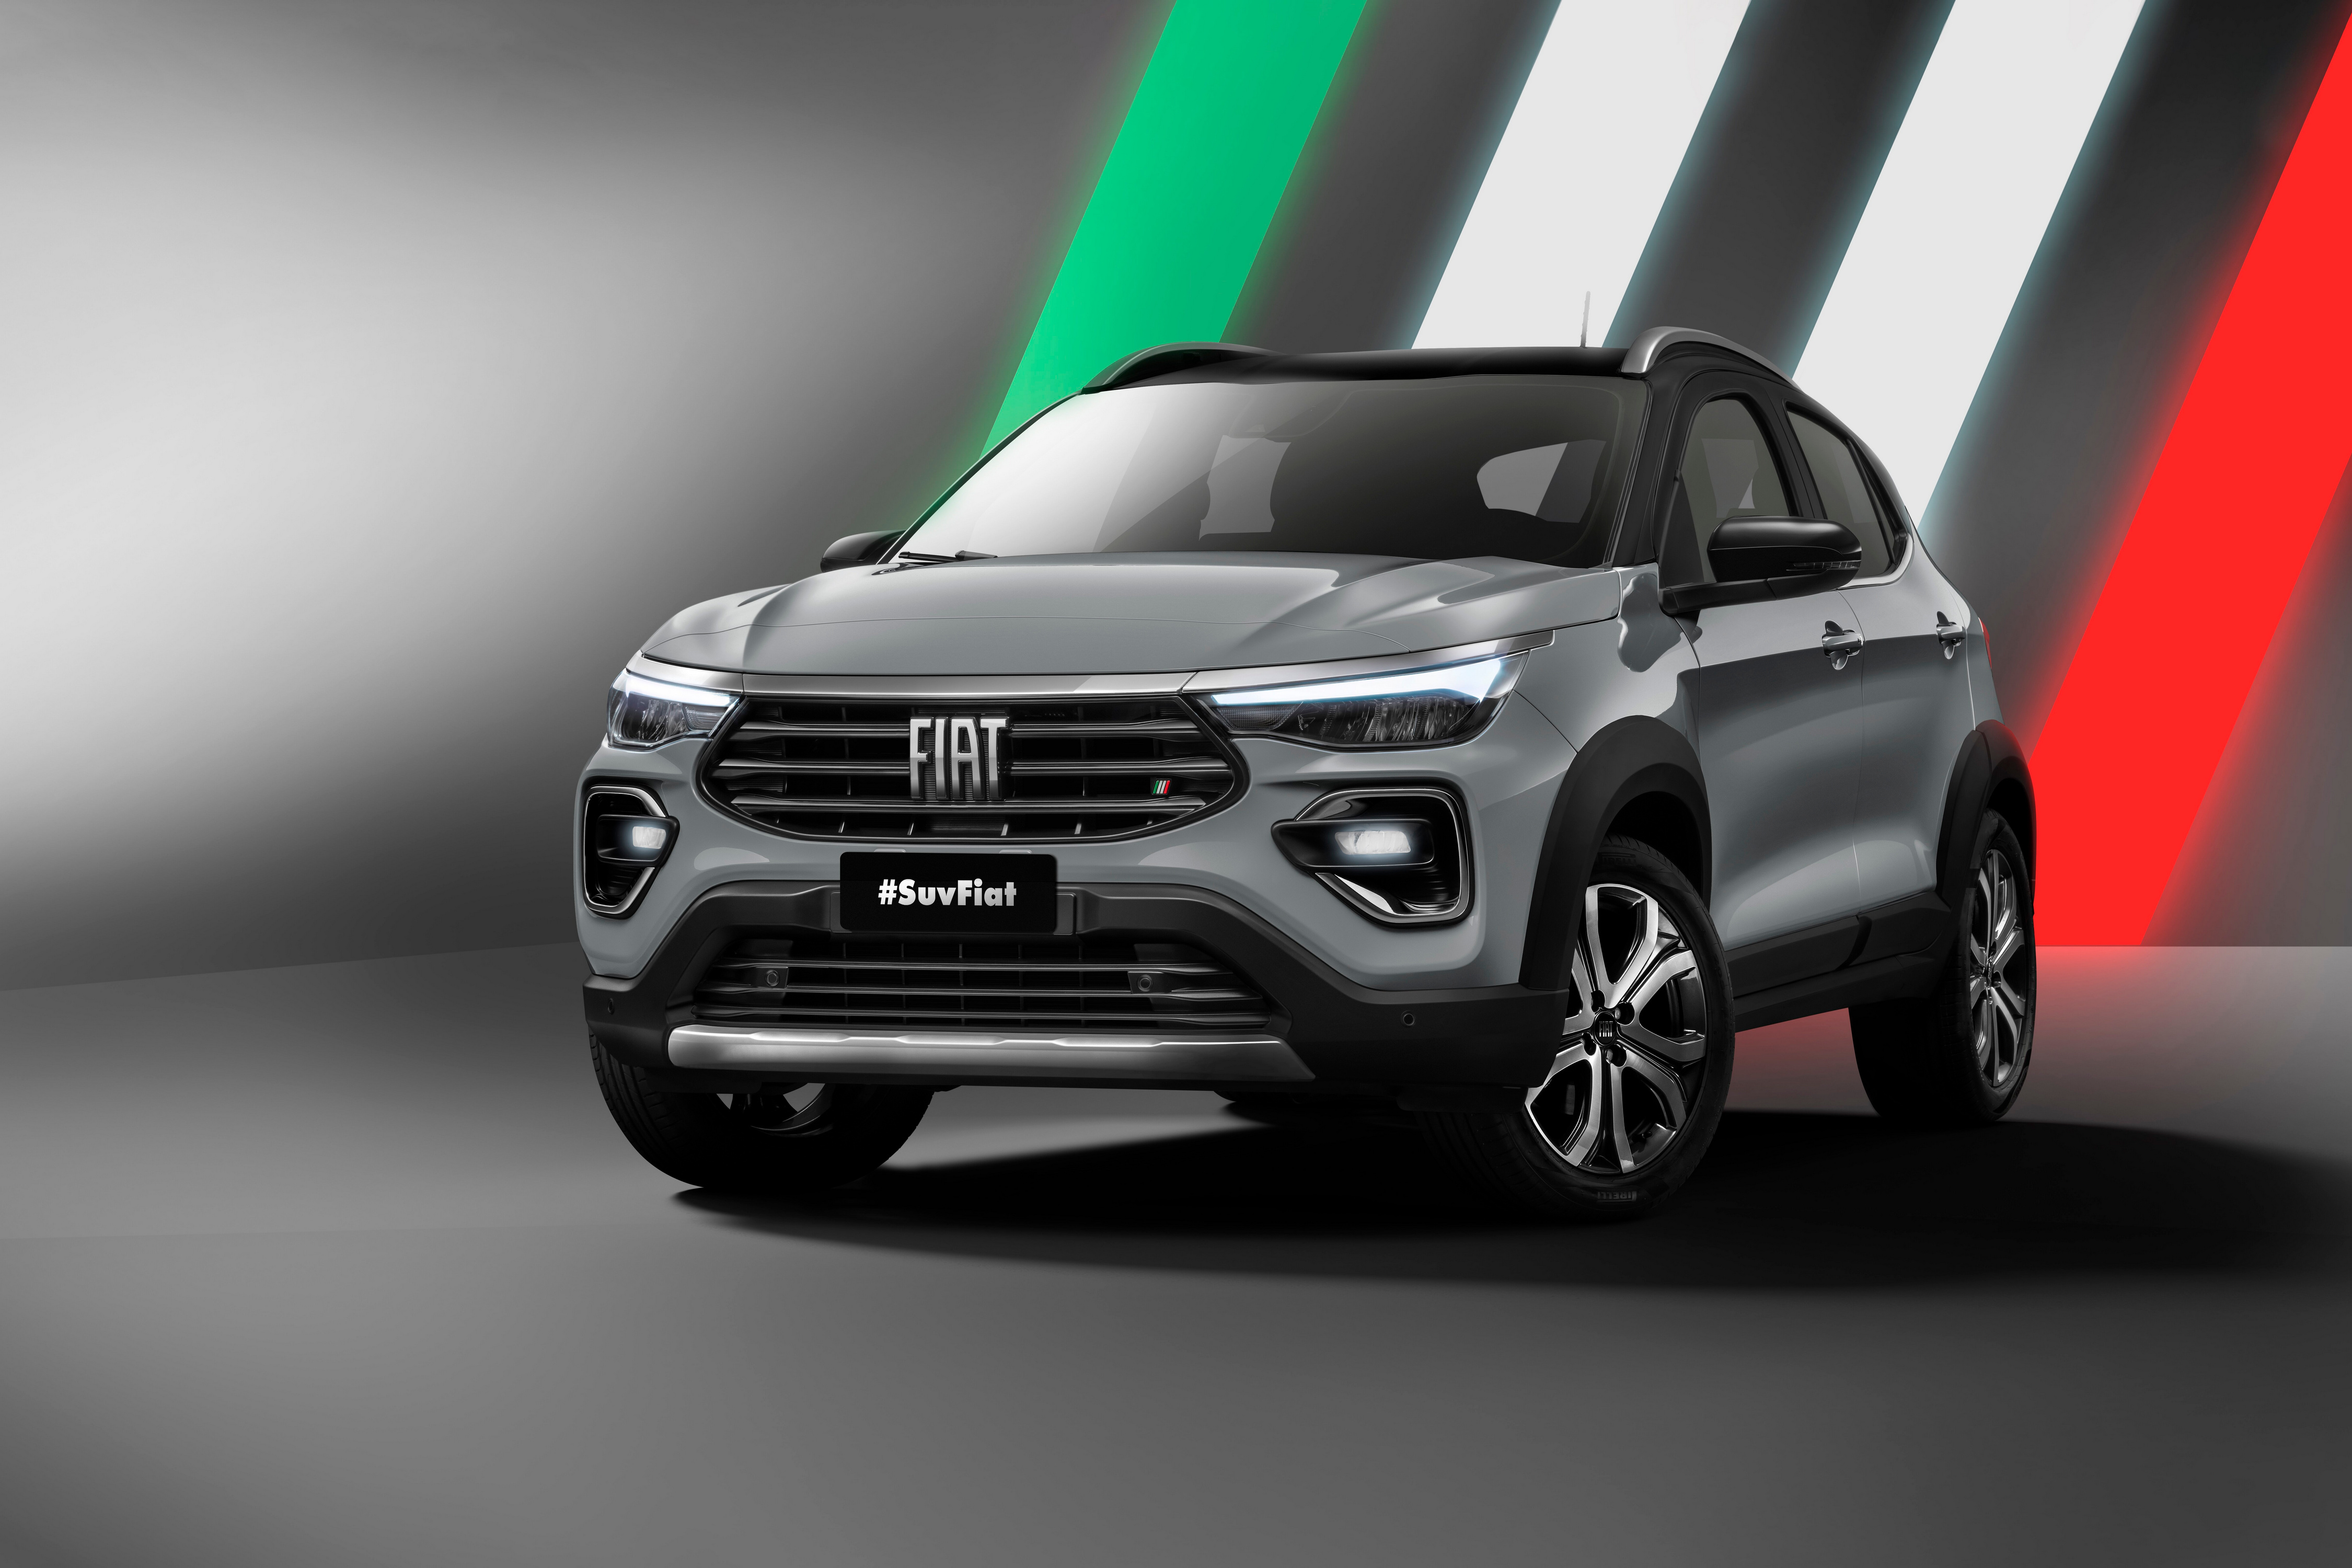 Wallpapers automobiles Fiat crossover on the desktop